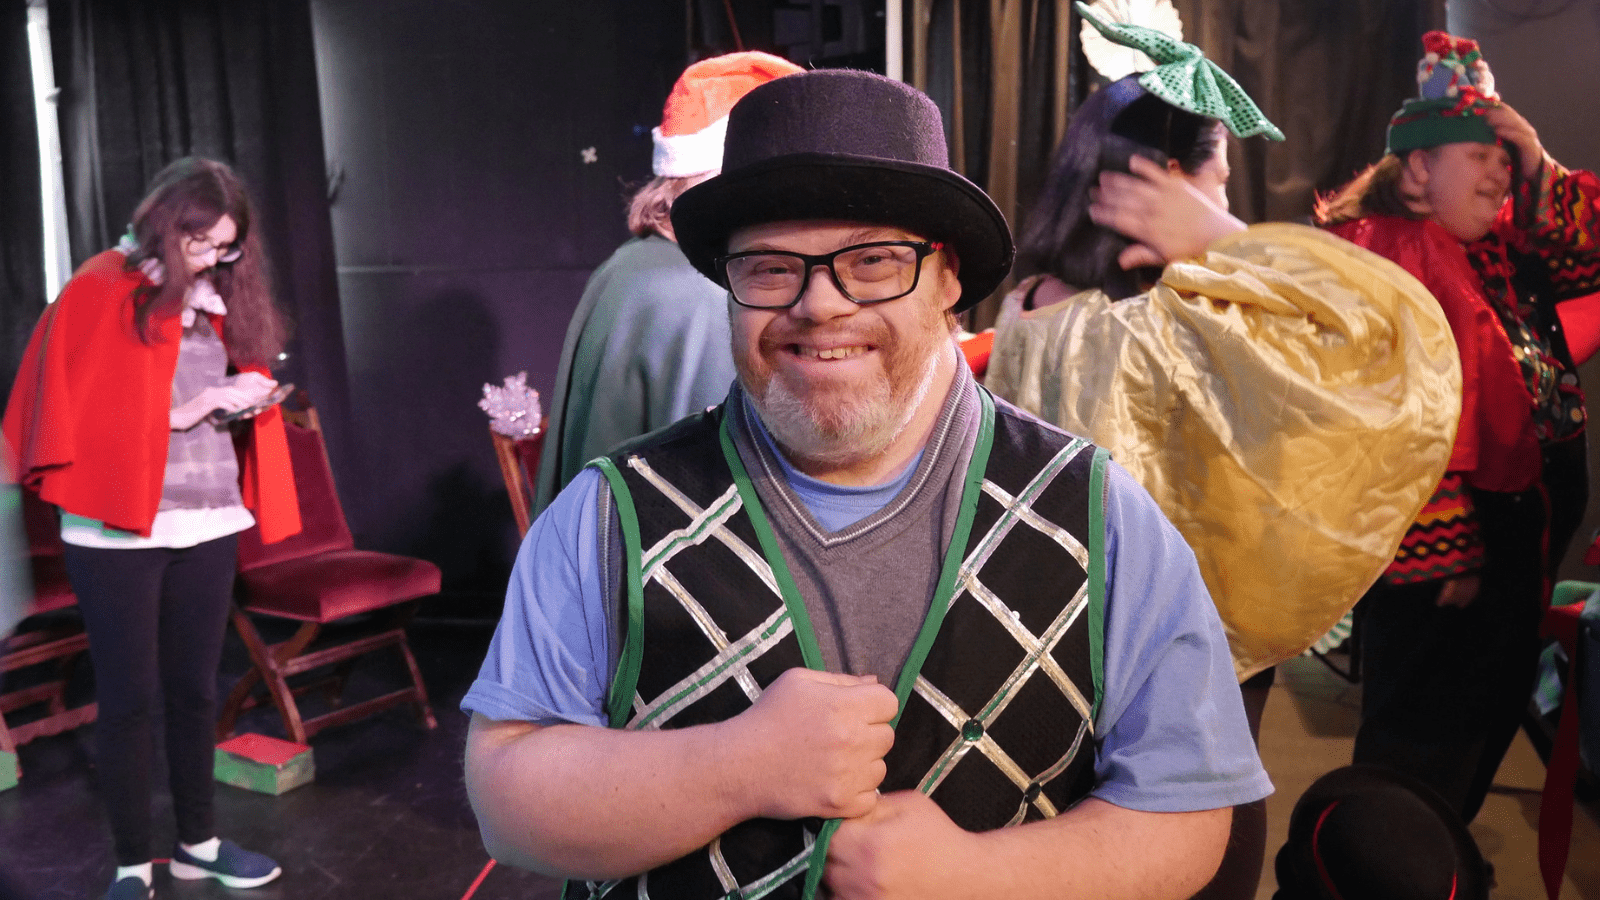 A man with glasses and a short beard wears a theater costume consisting of a bowler hat and a festive vest. He stands back stage and other performers are in the background.